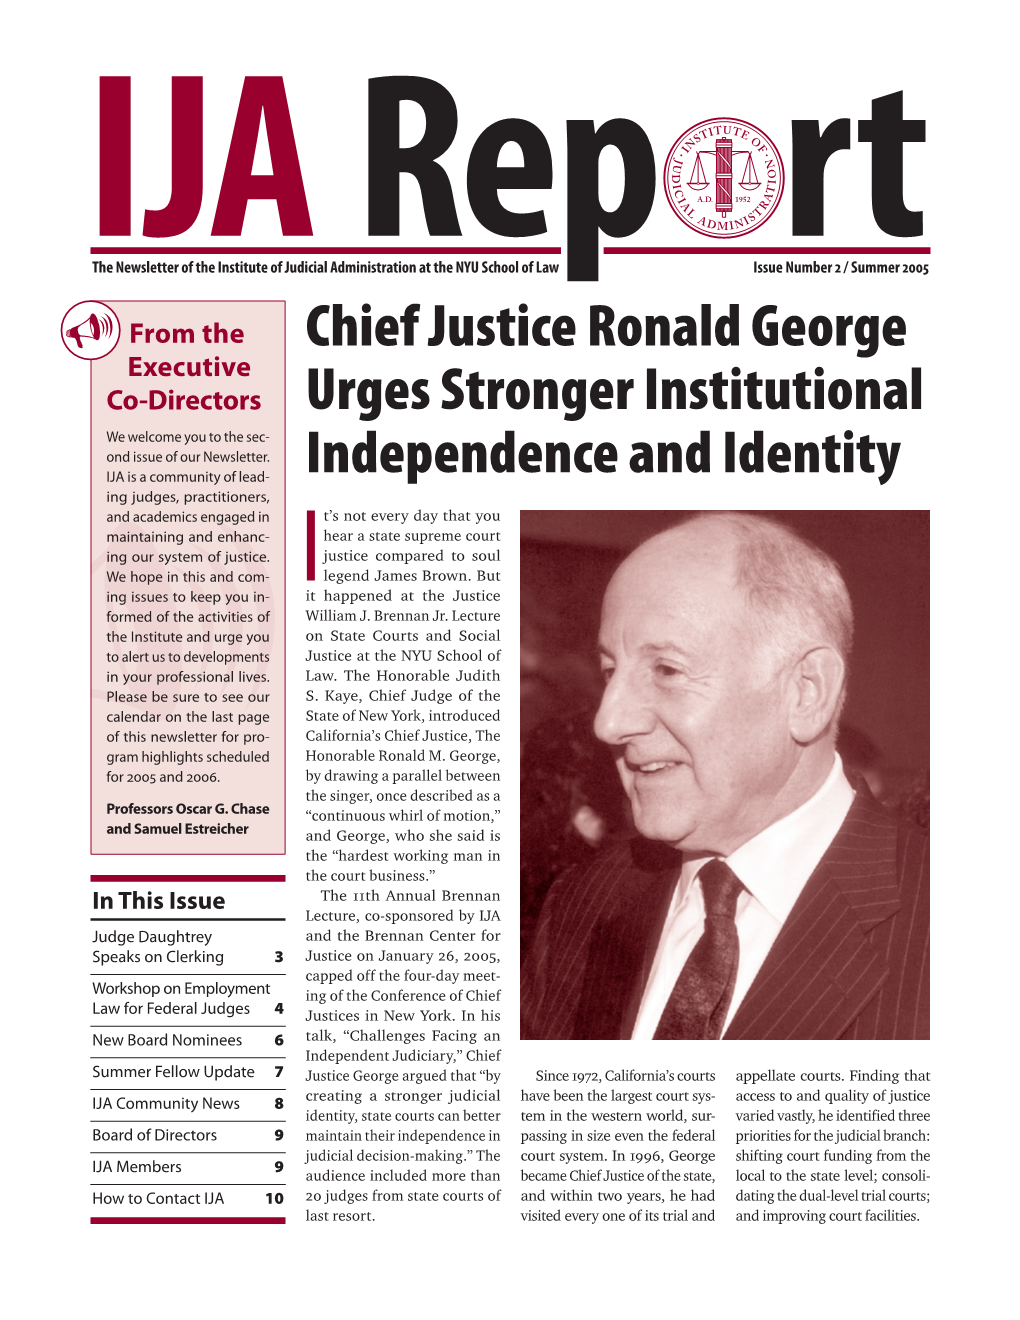 Chief Justice Ronald George Urges Stronger Institutional Independence and Identity